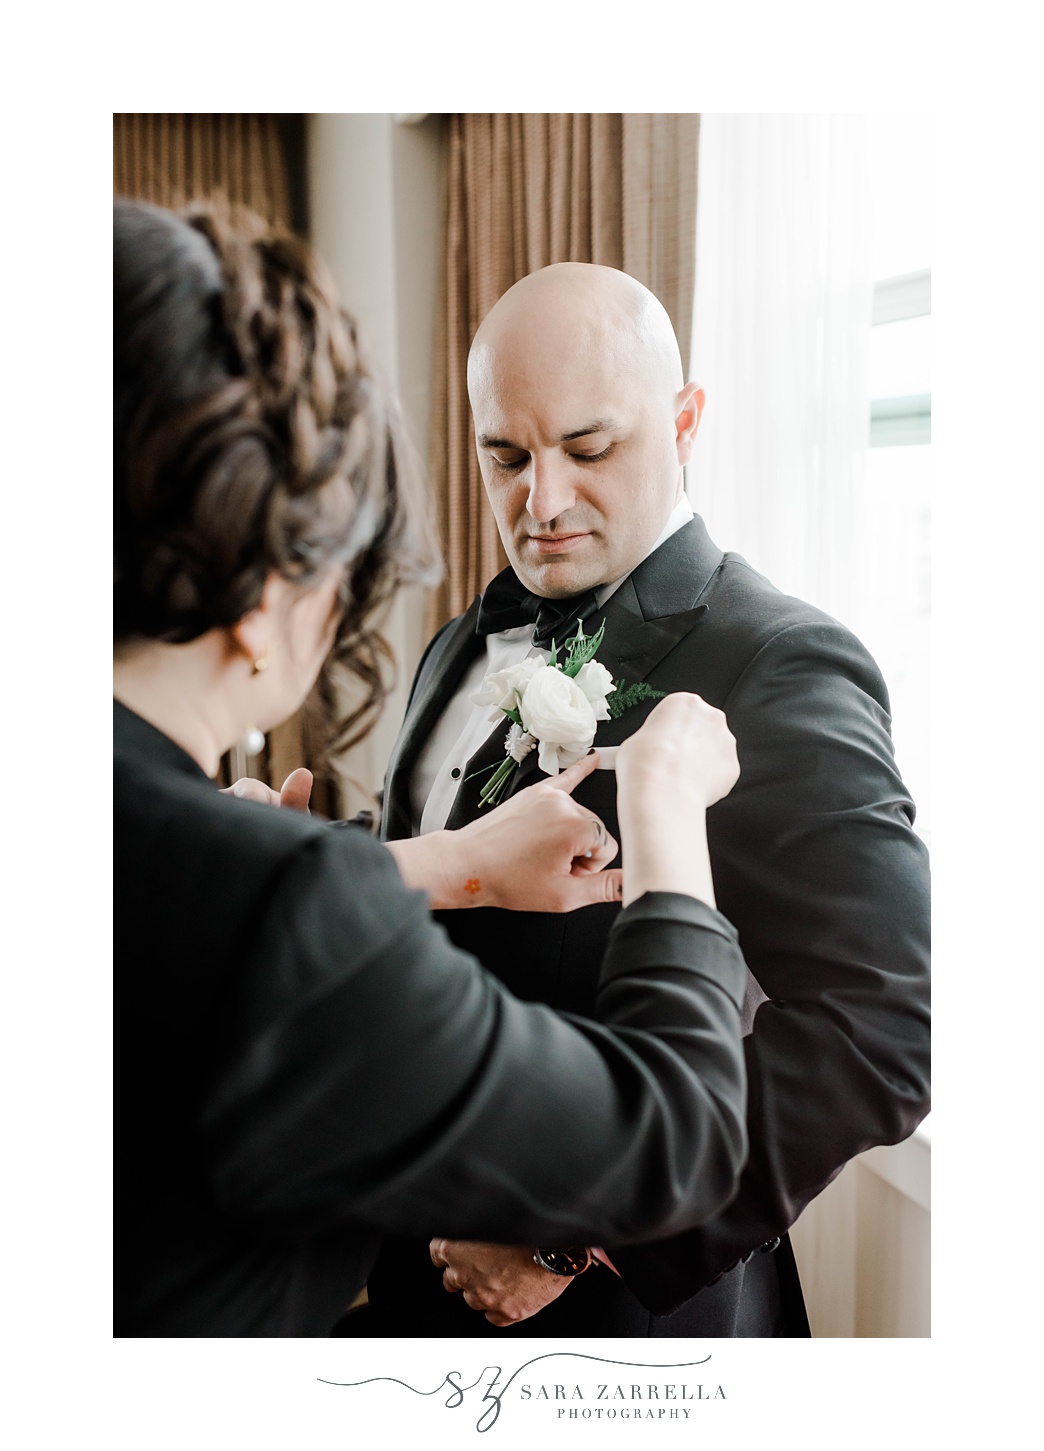 mom puts on boutonniere for groom